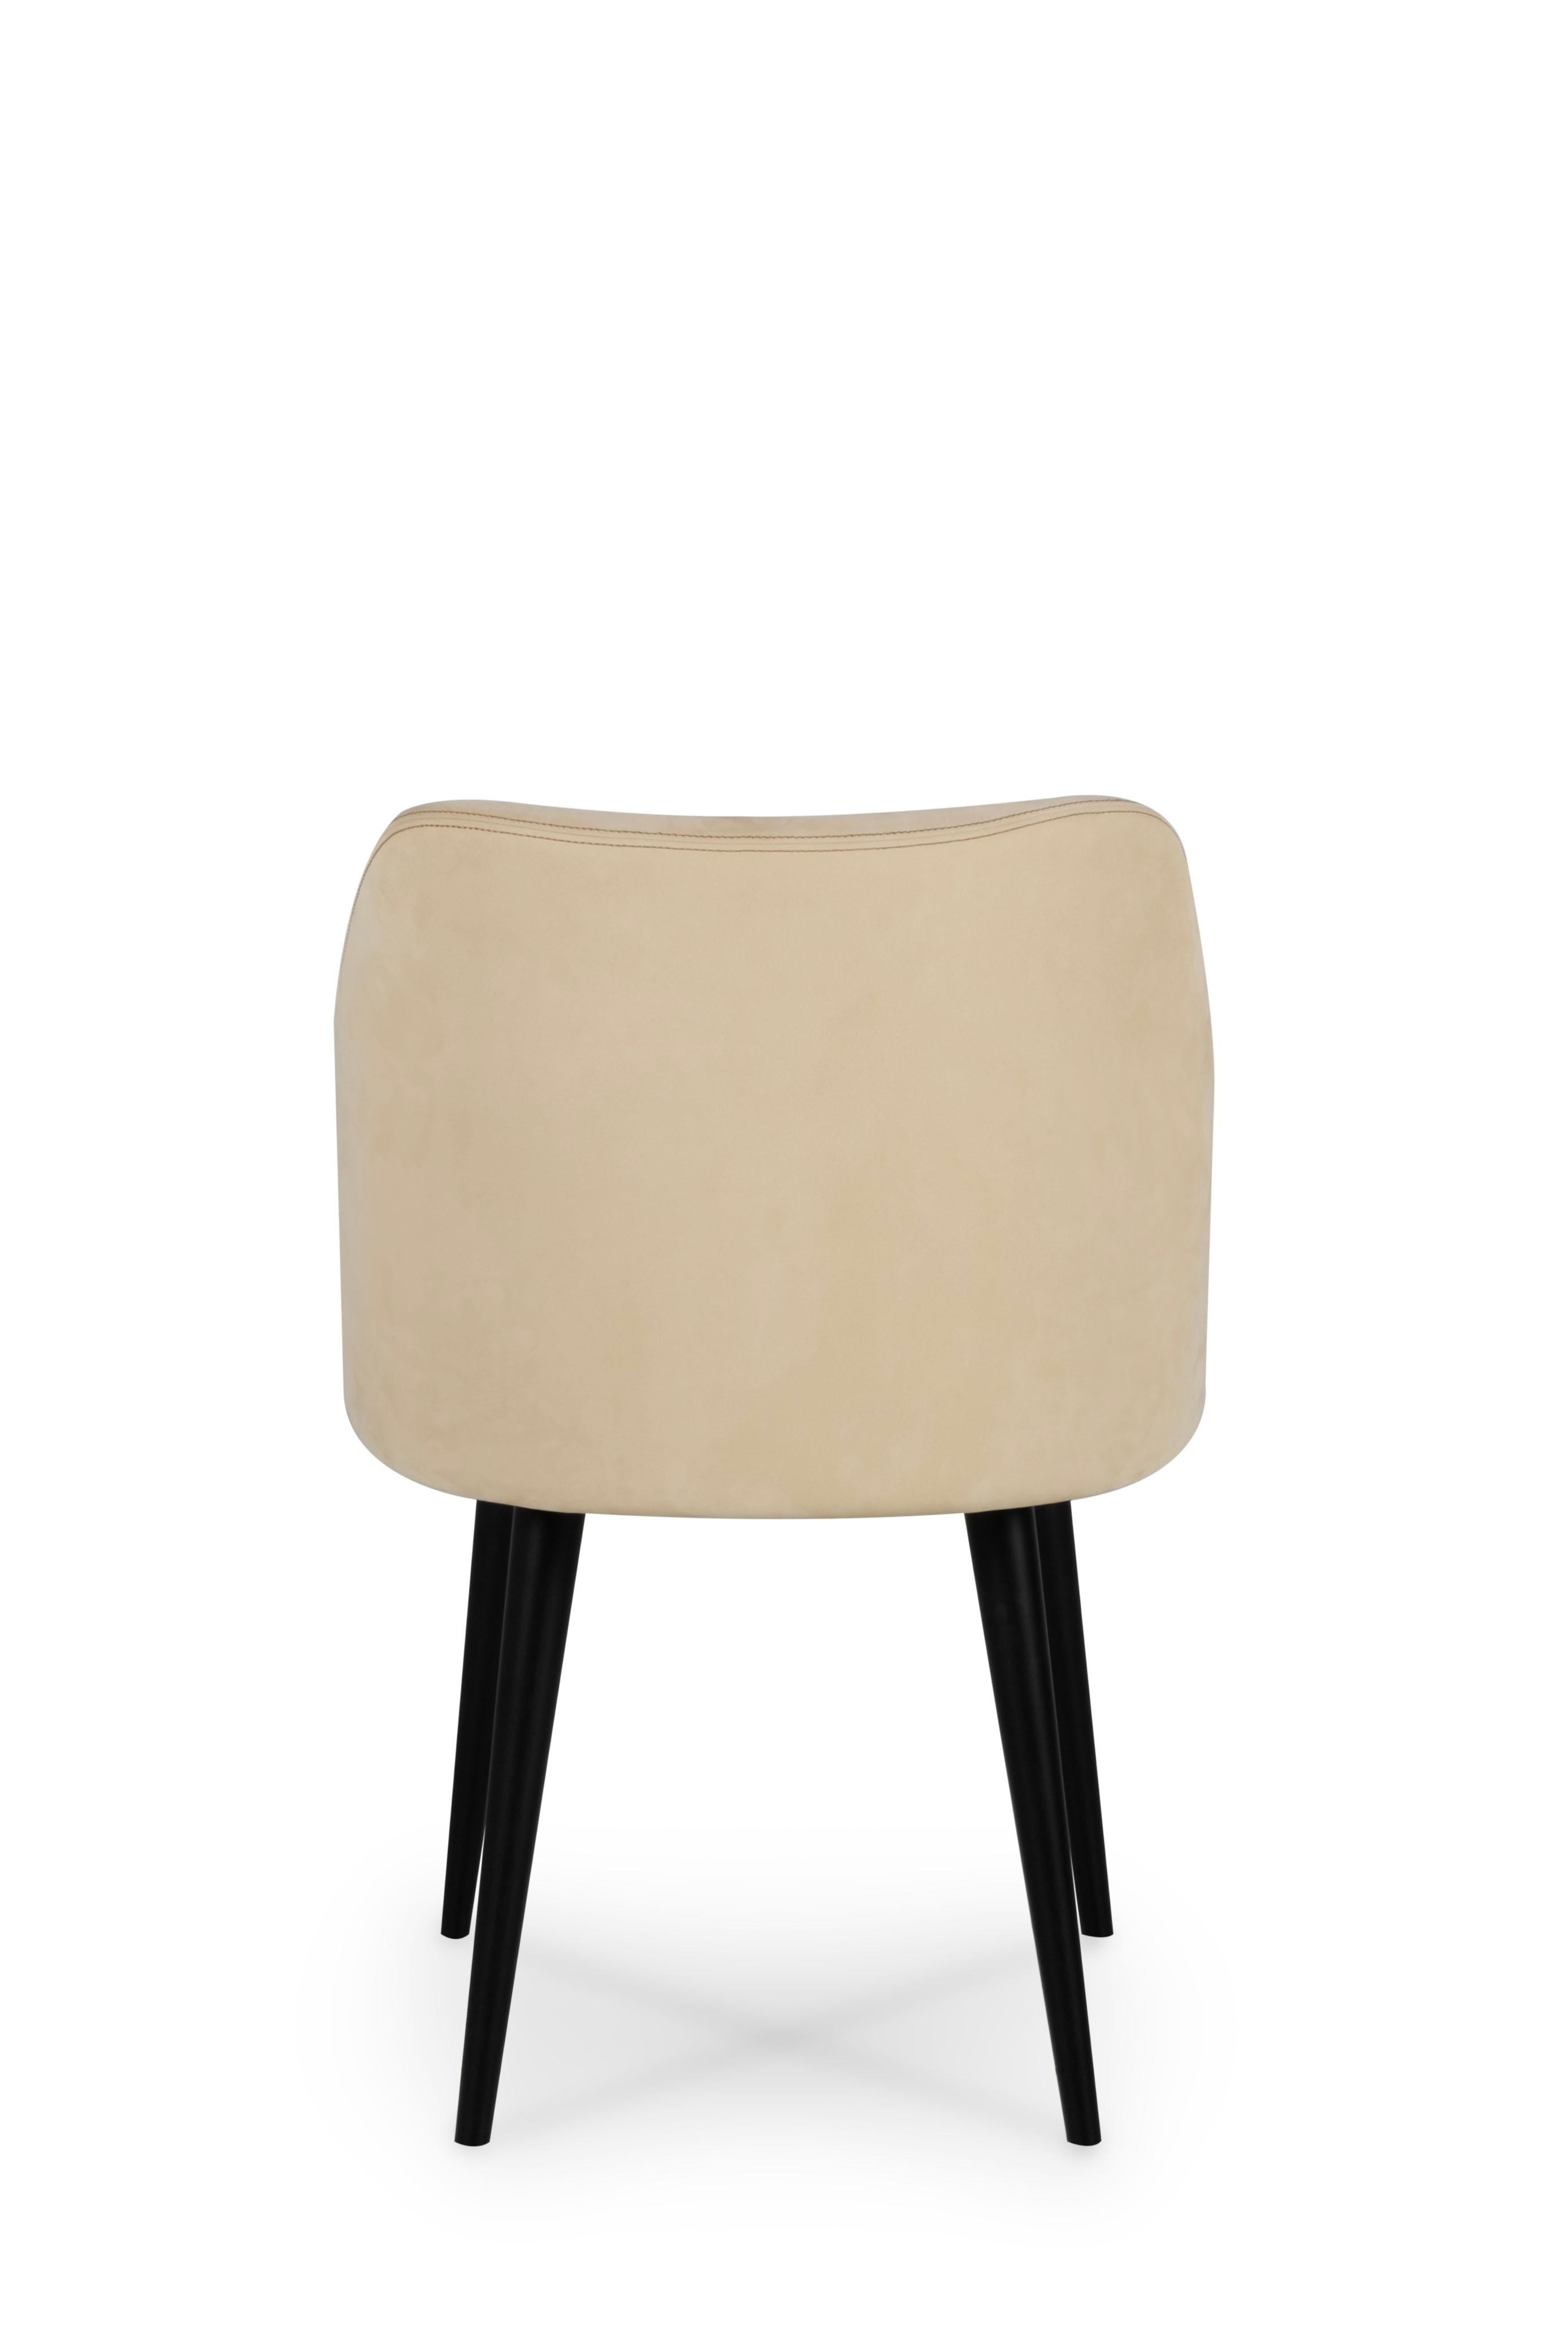 Modern Margot Dining Chairs, Nubuck Leather, Handmade in Portugal by Greenapple For Sale 7